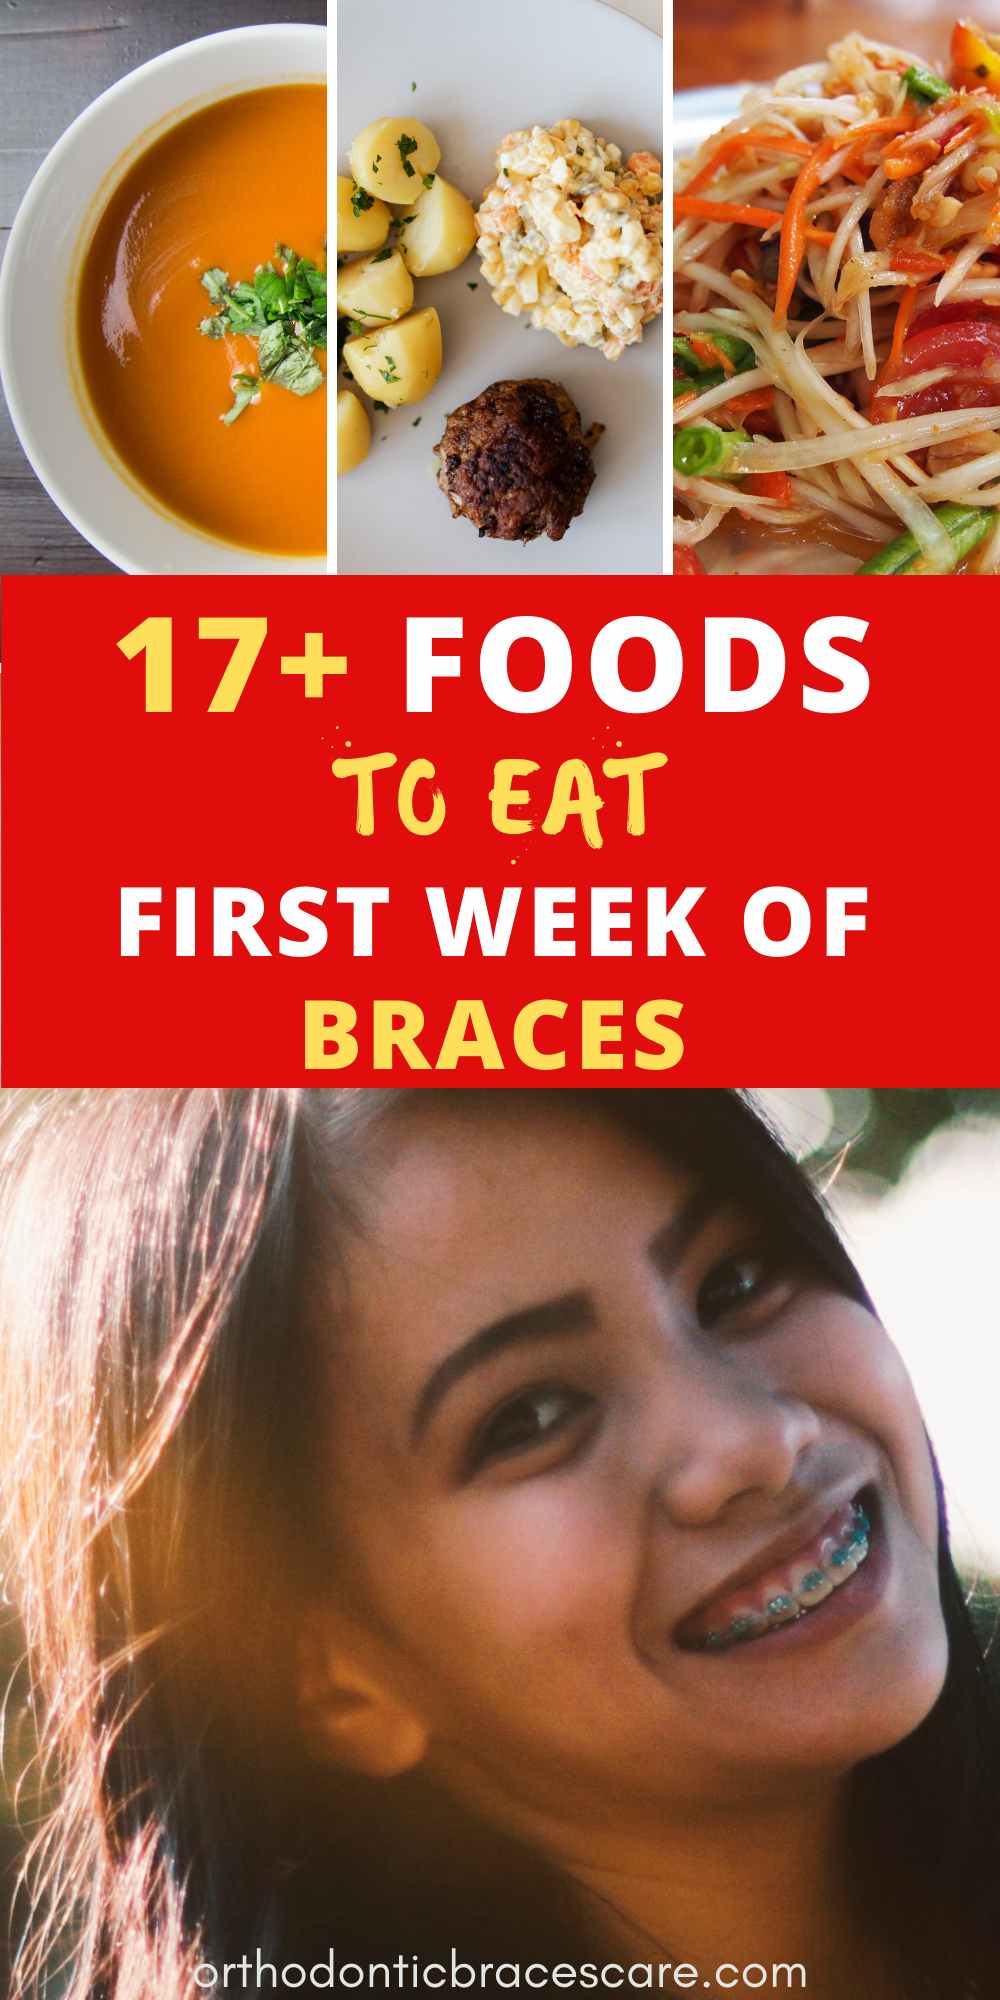 What To Eat With Braces The First Week With List Orthodontic Braces Care 